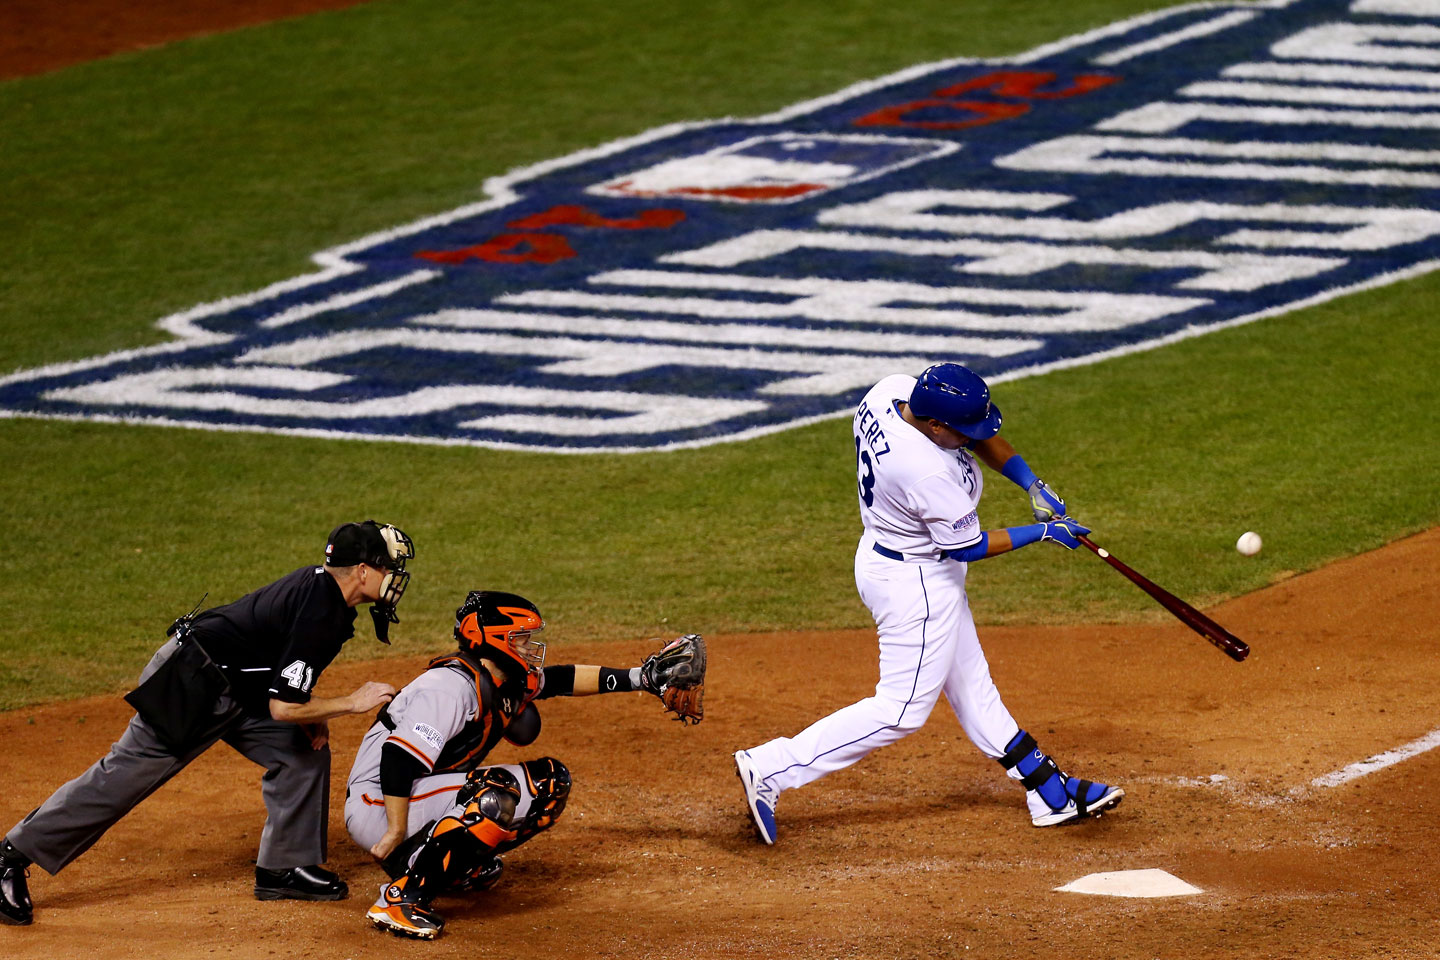 oyals catcher Salvador Perez hits a solo home run in the bottom of the seventh. The homer ends two impressive streaks for Madison Bumgarner: 21 scoreless innings in the World Series, and 32 2/3 scoreless innings in postseason play on the road -- that second streak being a major league record. Score now Giants 7, Royals 1. (Ed Zurga/Getty Images)